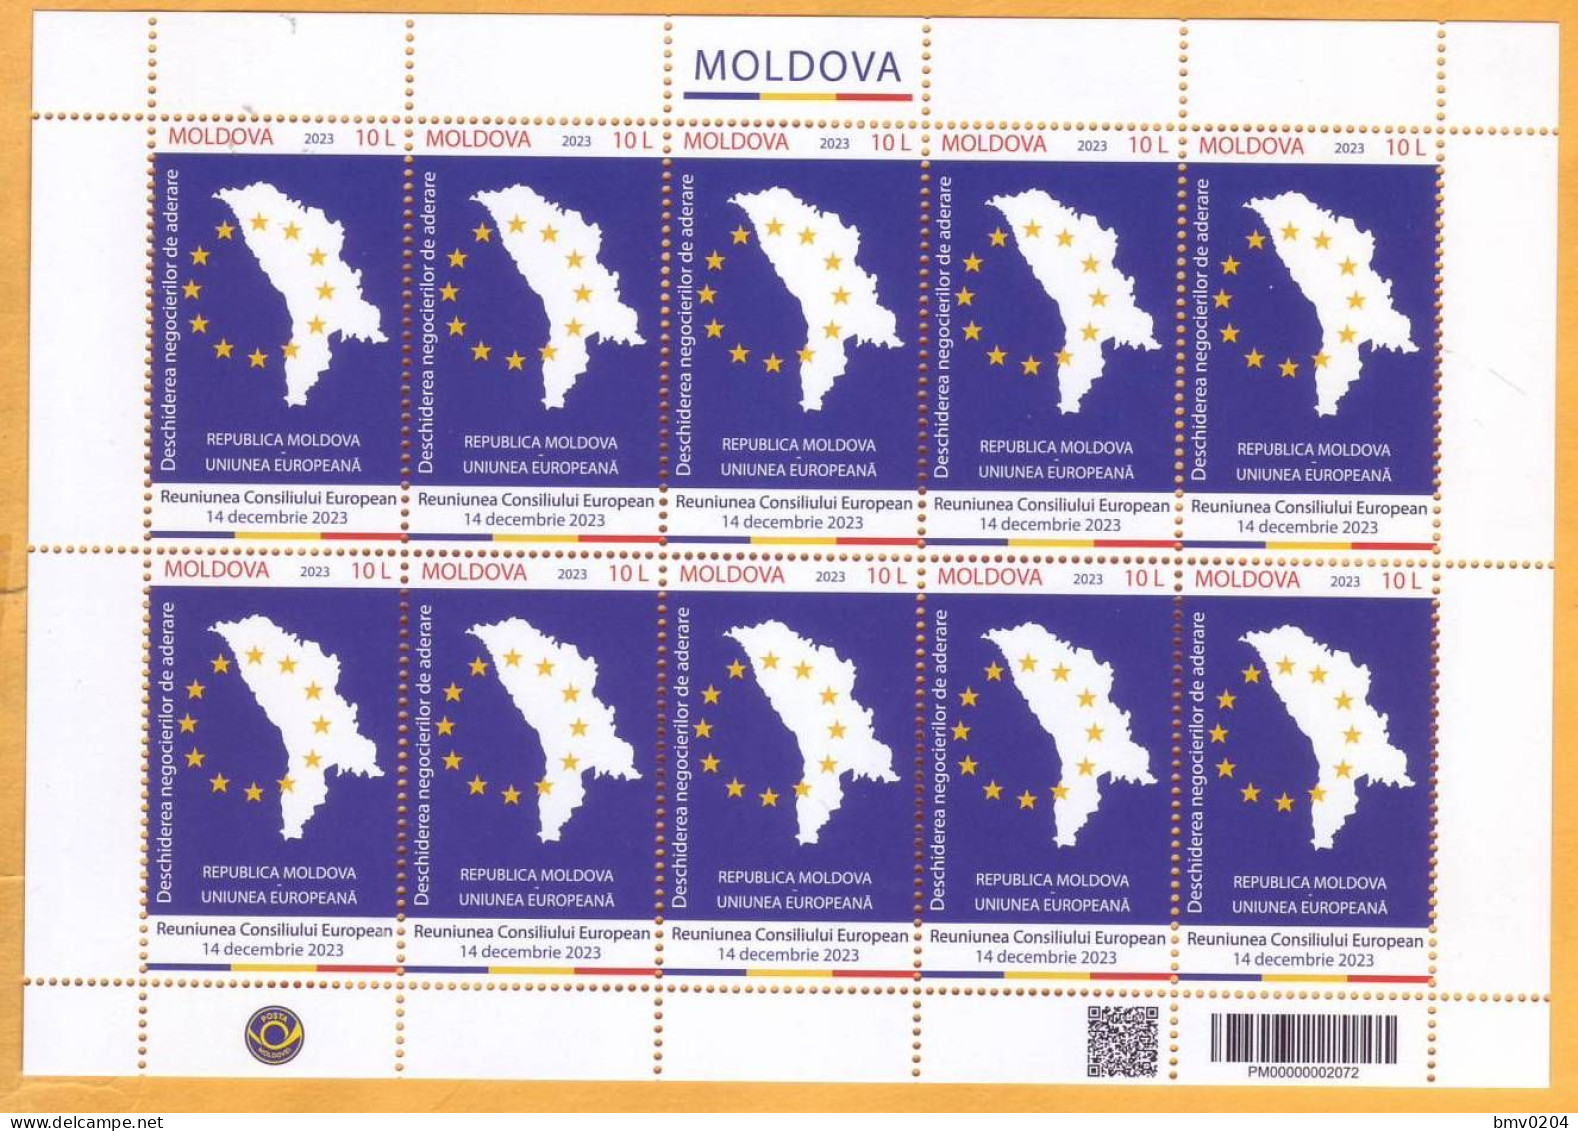 2023  Moldova  Sheet The Opening Of Accession Negotiations REPUBLIC OF MOLDOVA - EUROPEAN UNION  Mint - Europese Gedachte